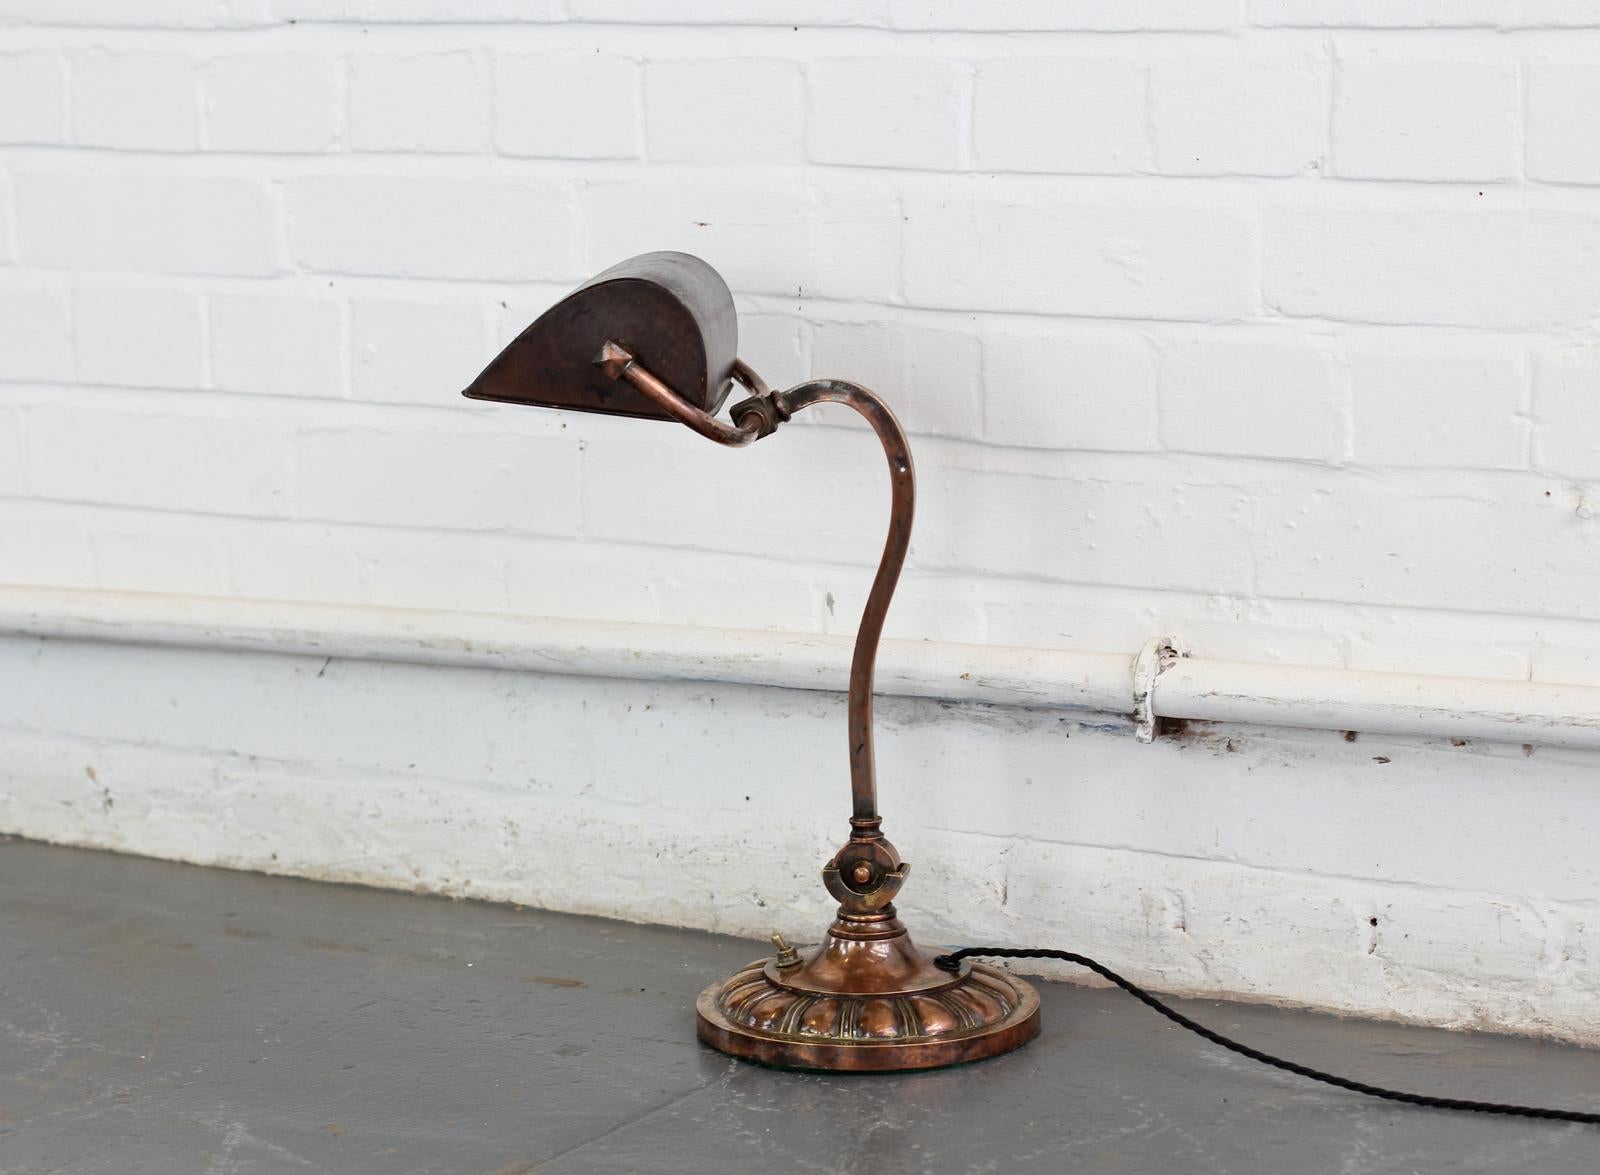 Early 20th century English copper desk lamp, circa 1910

- Beautiful detailed base
- Brass switch
- Takes B22 fitting bulbs
- Black braided cable
- English, circa 1910
- Measures: 44cm tall x 27cm wide x 24cm deep

Condition